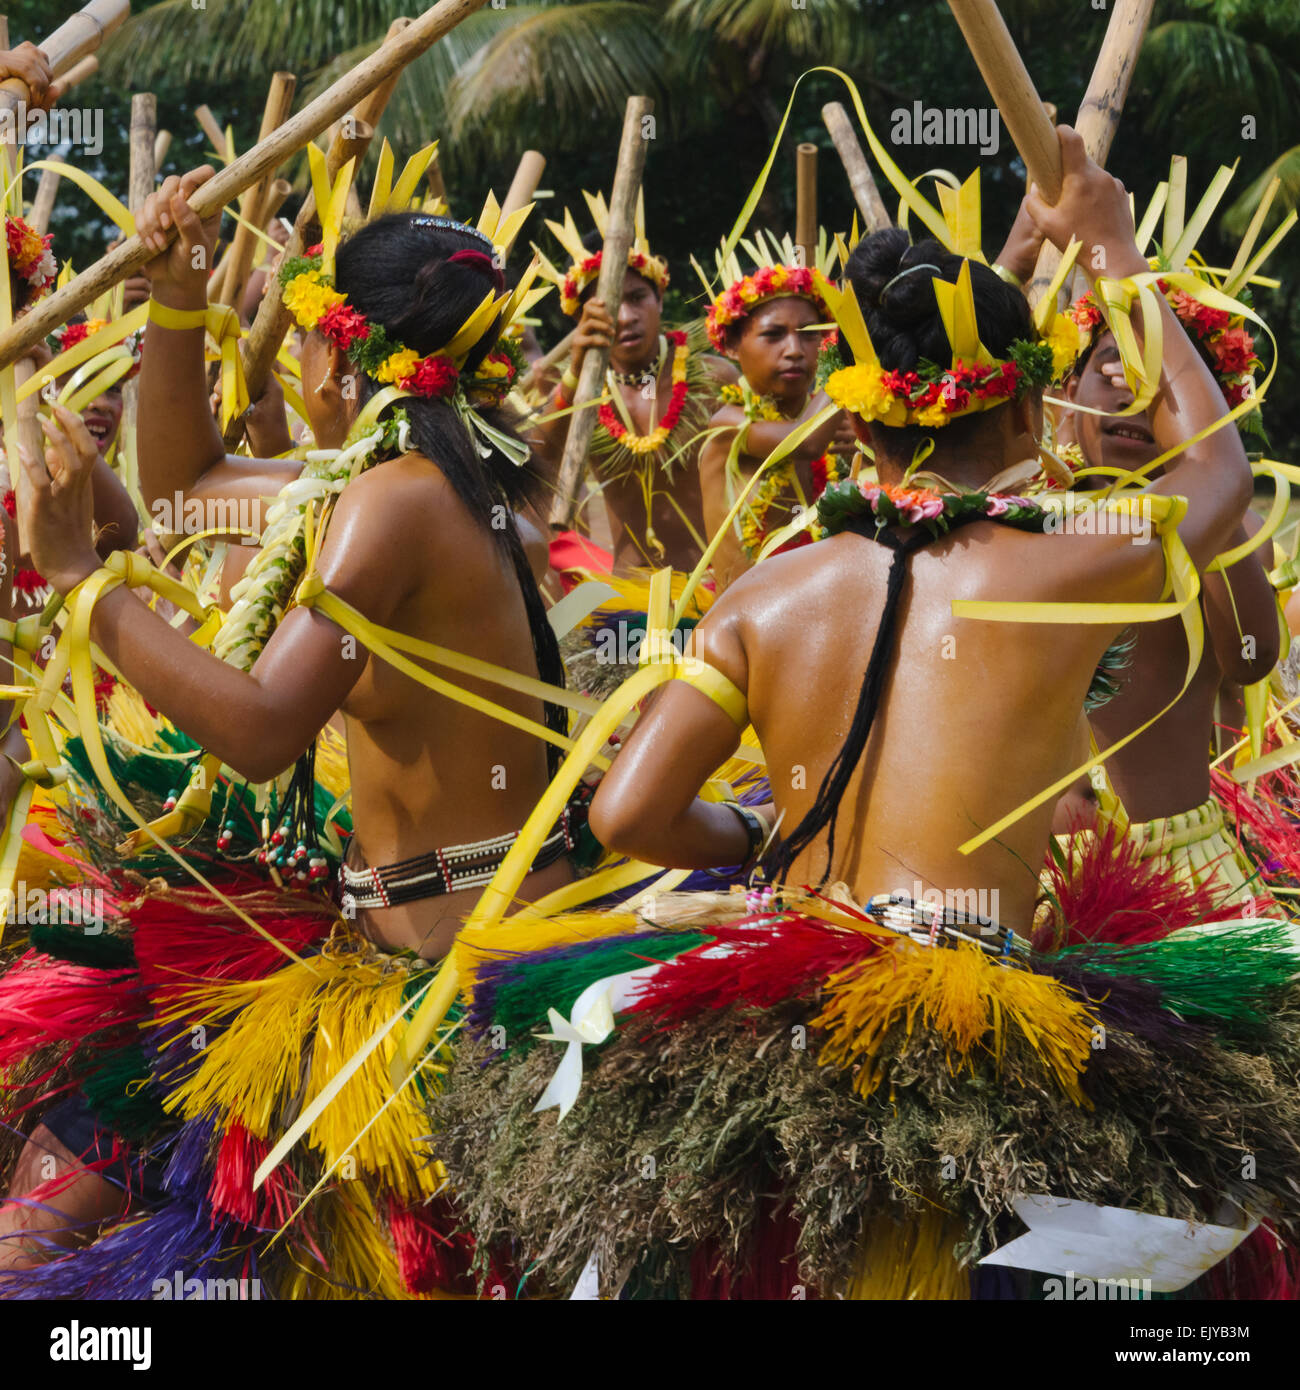 Yapese girls in traditional clothing dancing with bamboo pole at Yap Day Festival, Yap Island, Federated States of Micronesia Stock Photo